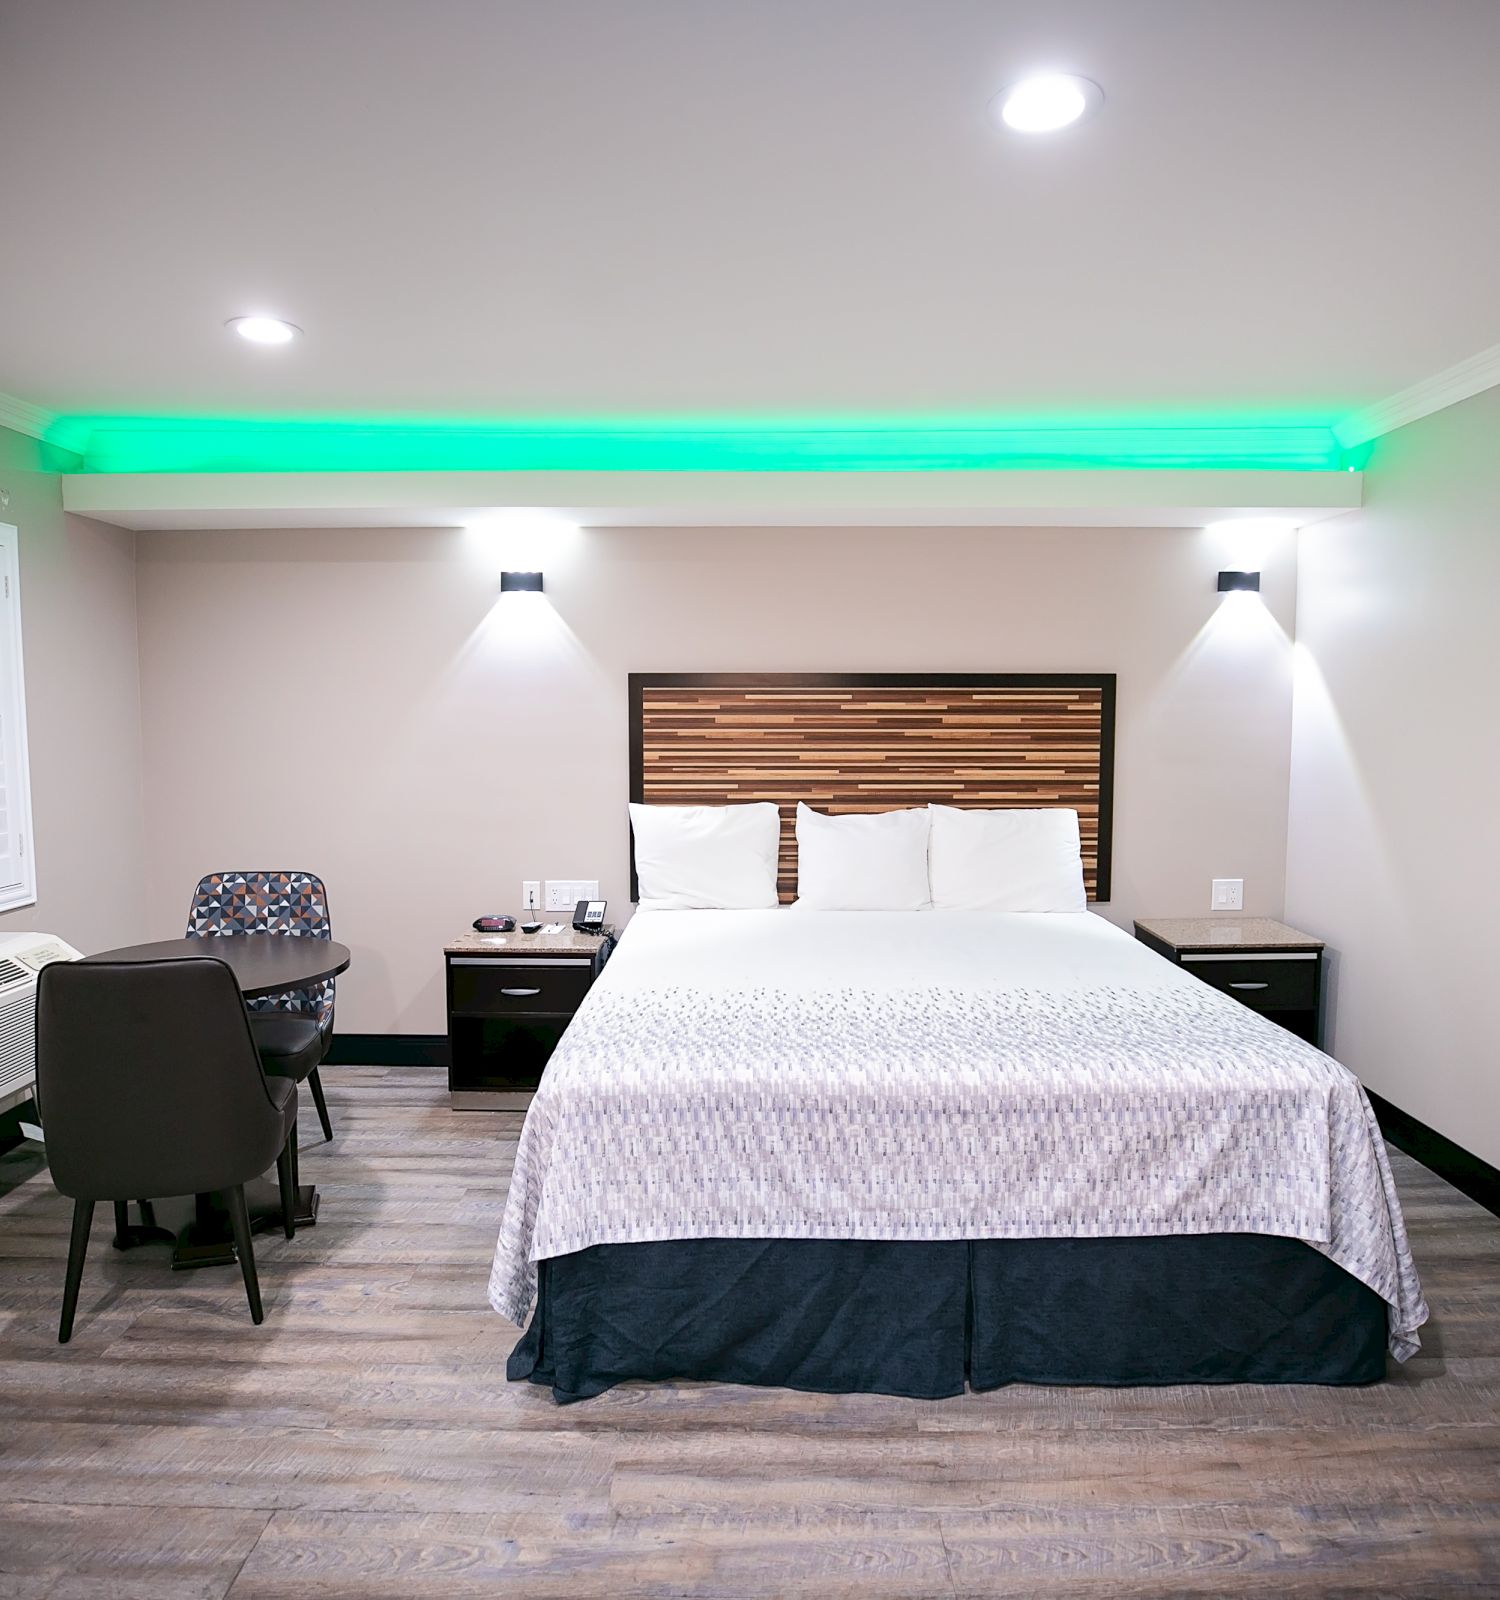 A modern hotel room with a bed, small desk with chair, wall art, and green accent lighting. Light-colored walls and wooden floors enhance the space.